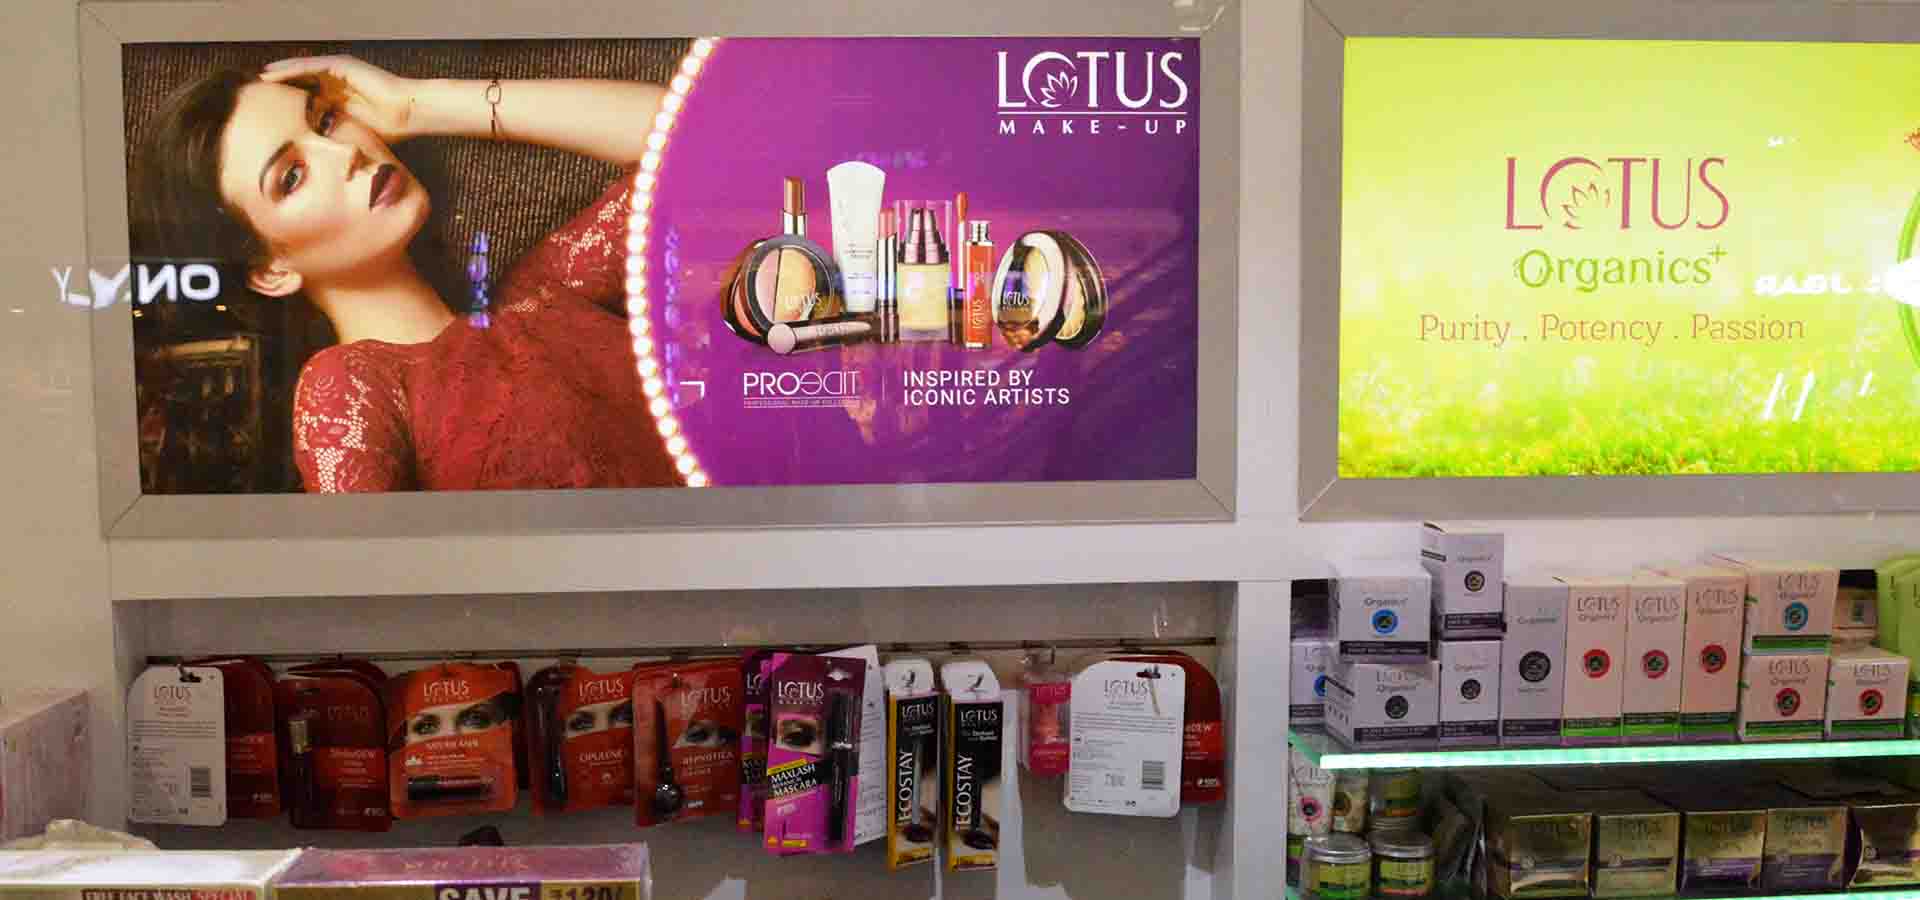 Lotus Herbals store photos in mall